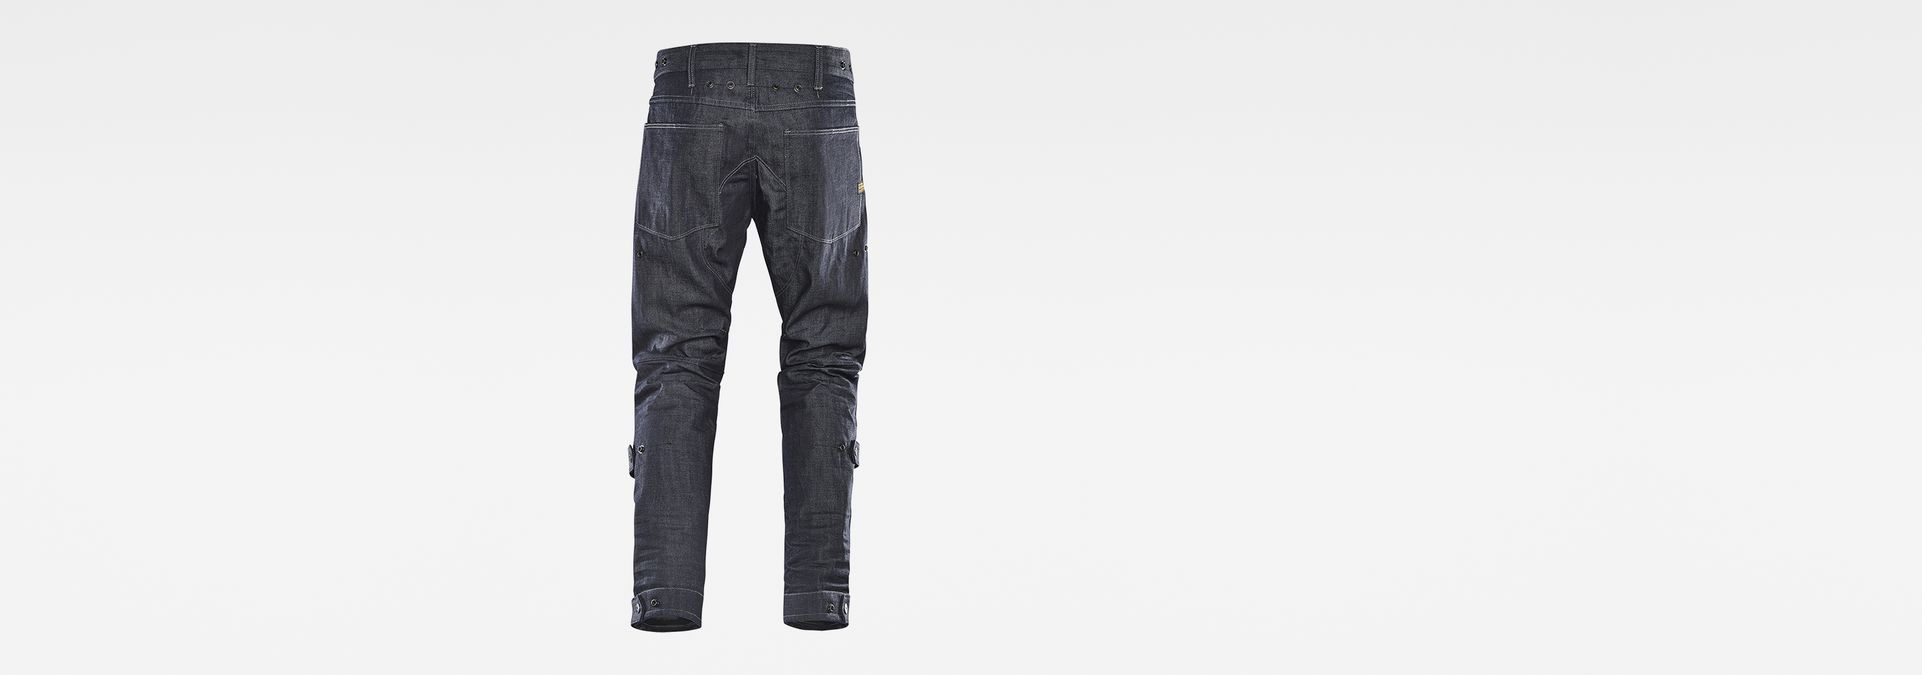 E 5620 3D Original Relaxed Adjuster Jeans | G-Star RAW®